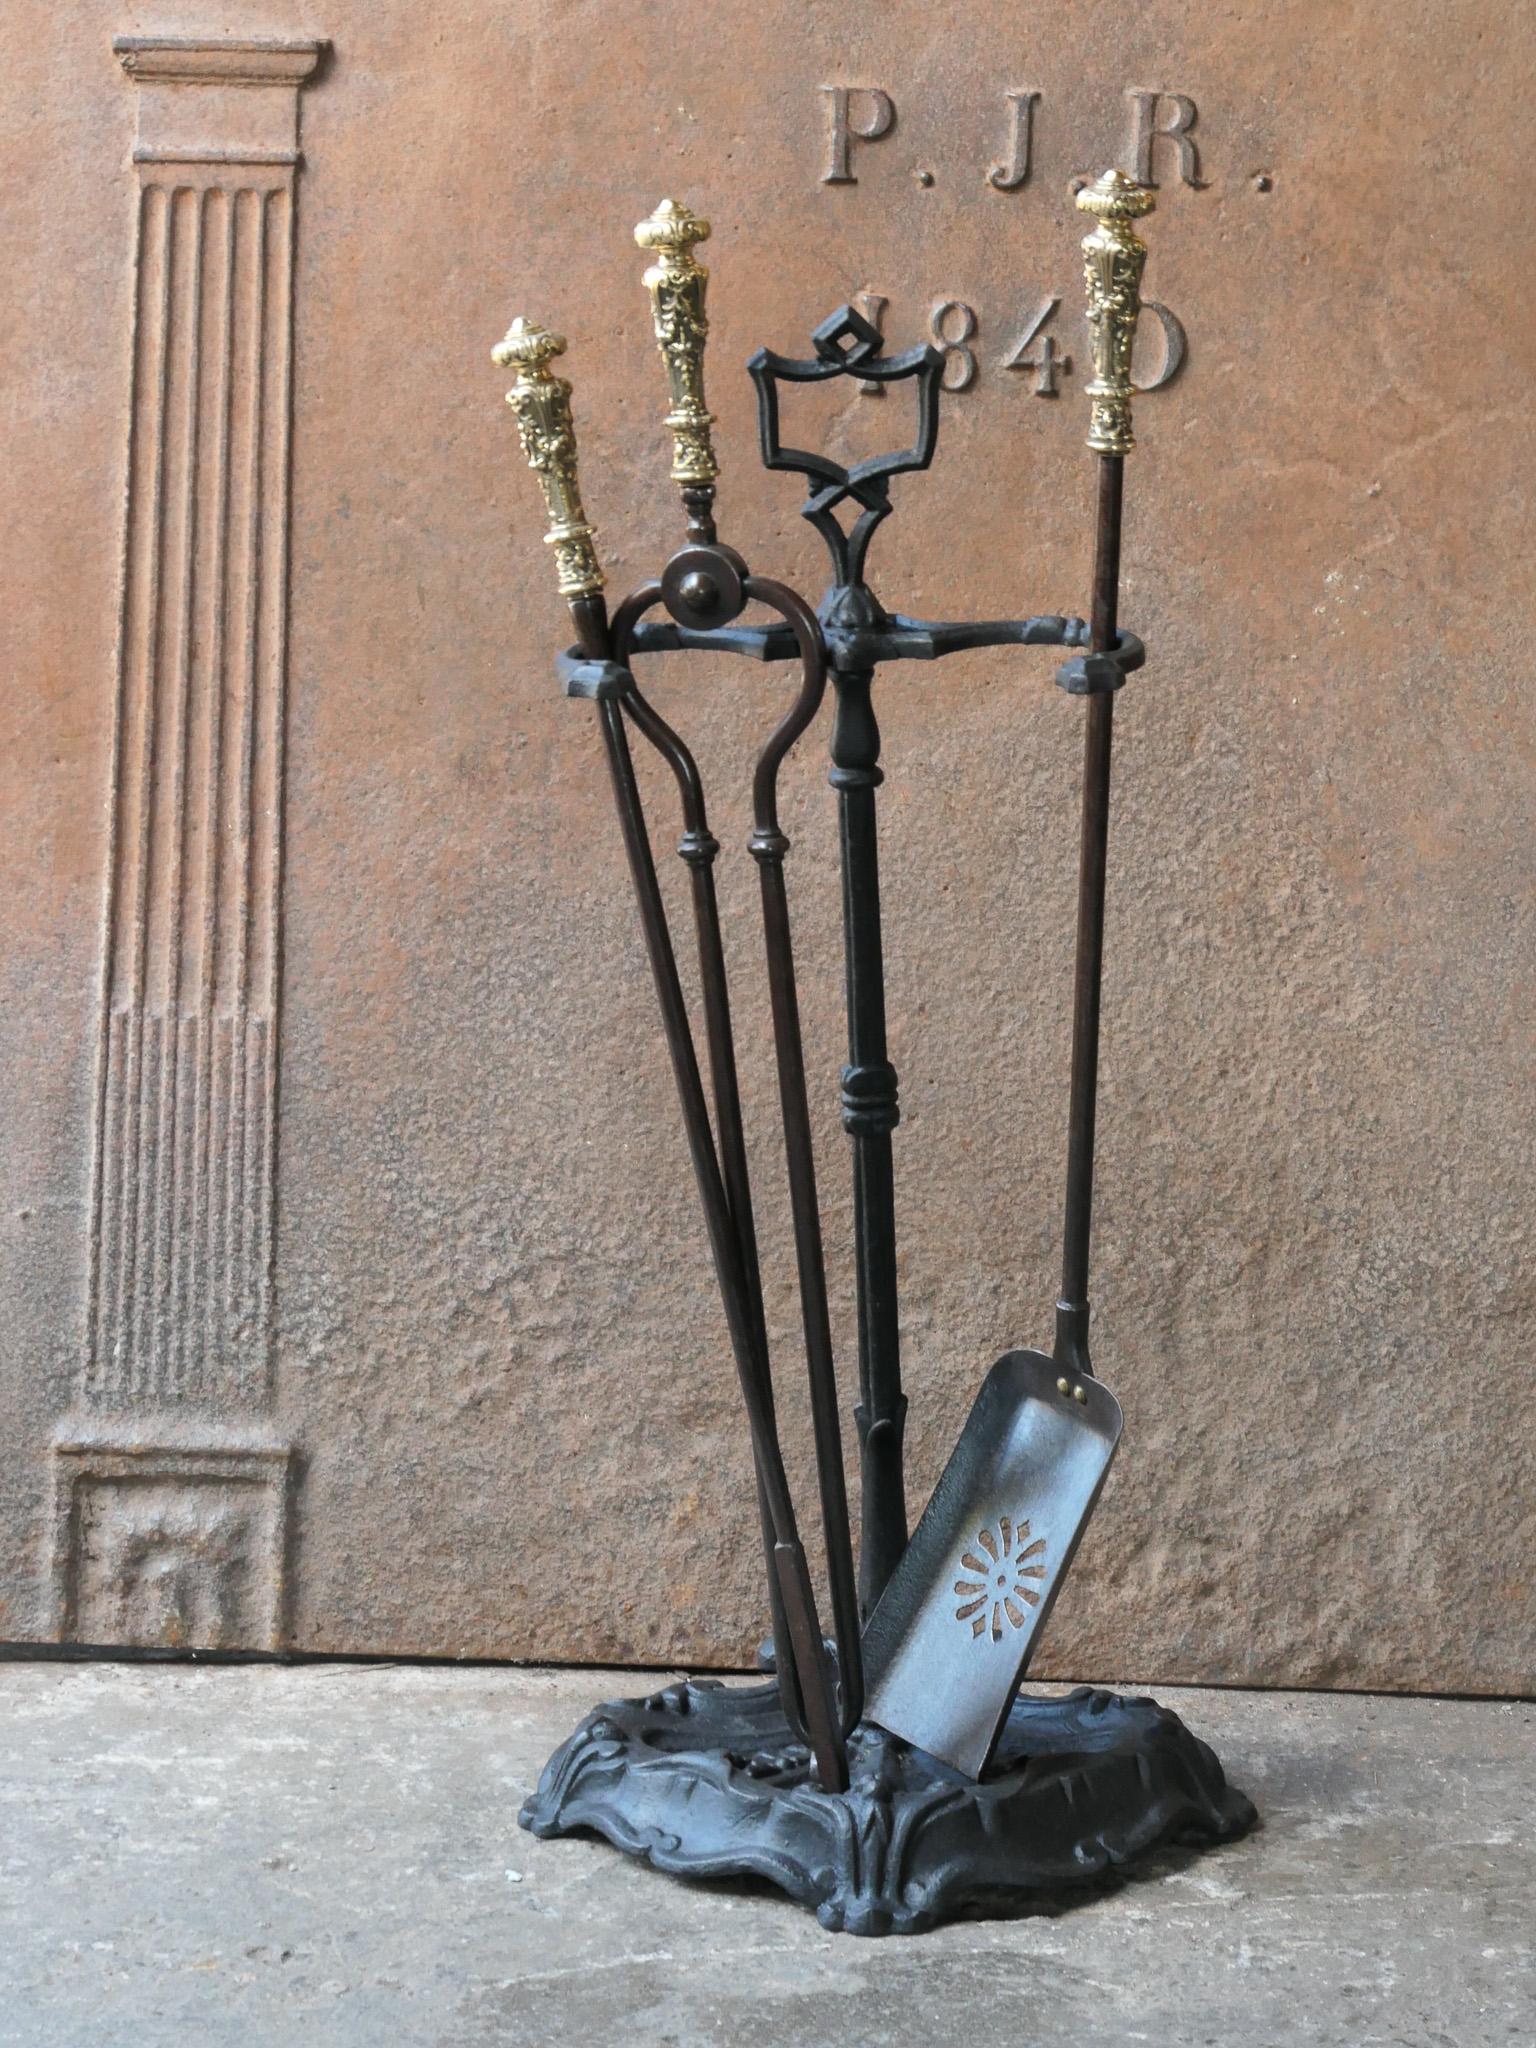 19th century English Victorian period fireplace toolset. The tools are made of wrought iron with bronze handles, while the stand is made of cast iron. The toolset consists of tongs, shovel and stand. The condition is good.








.